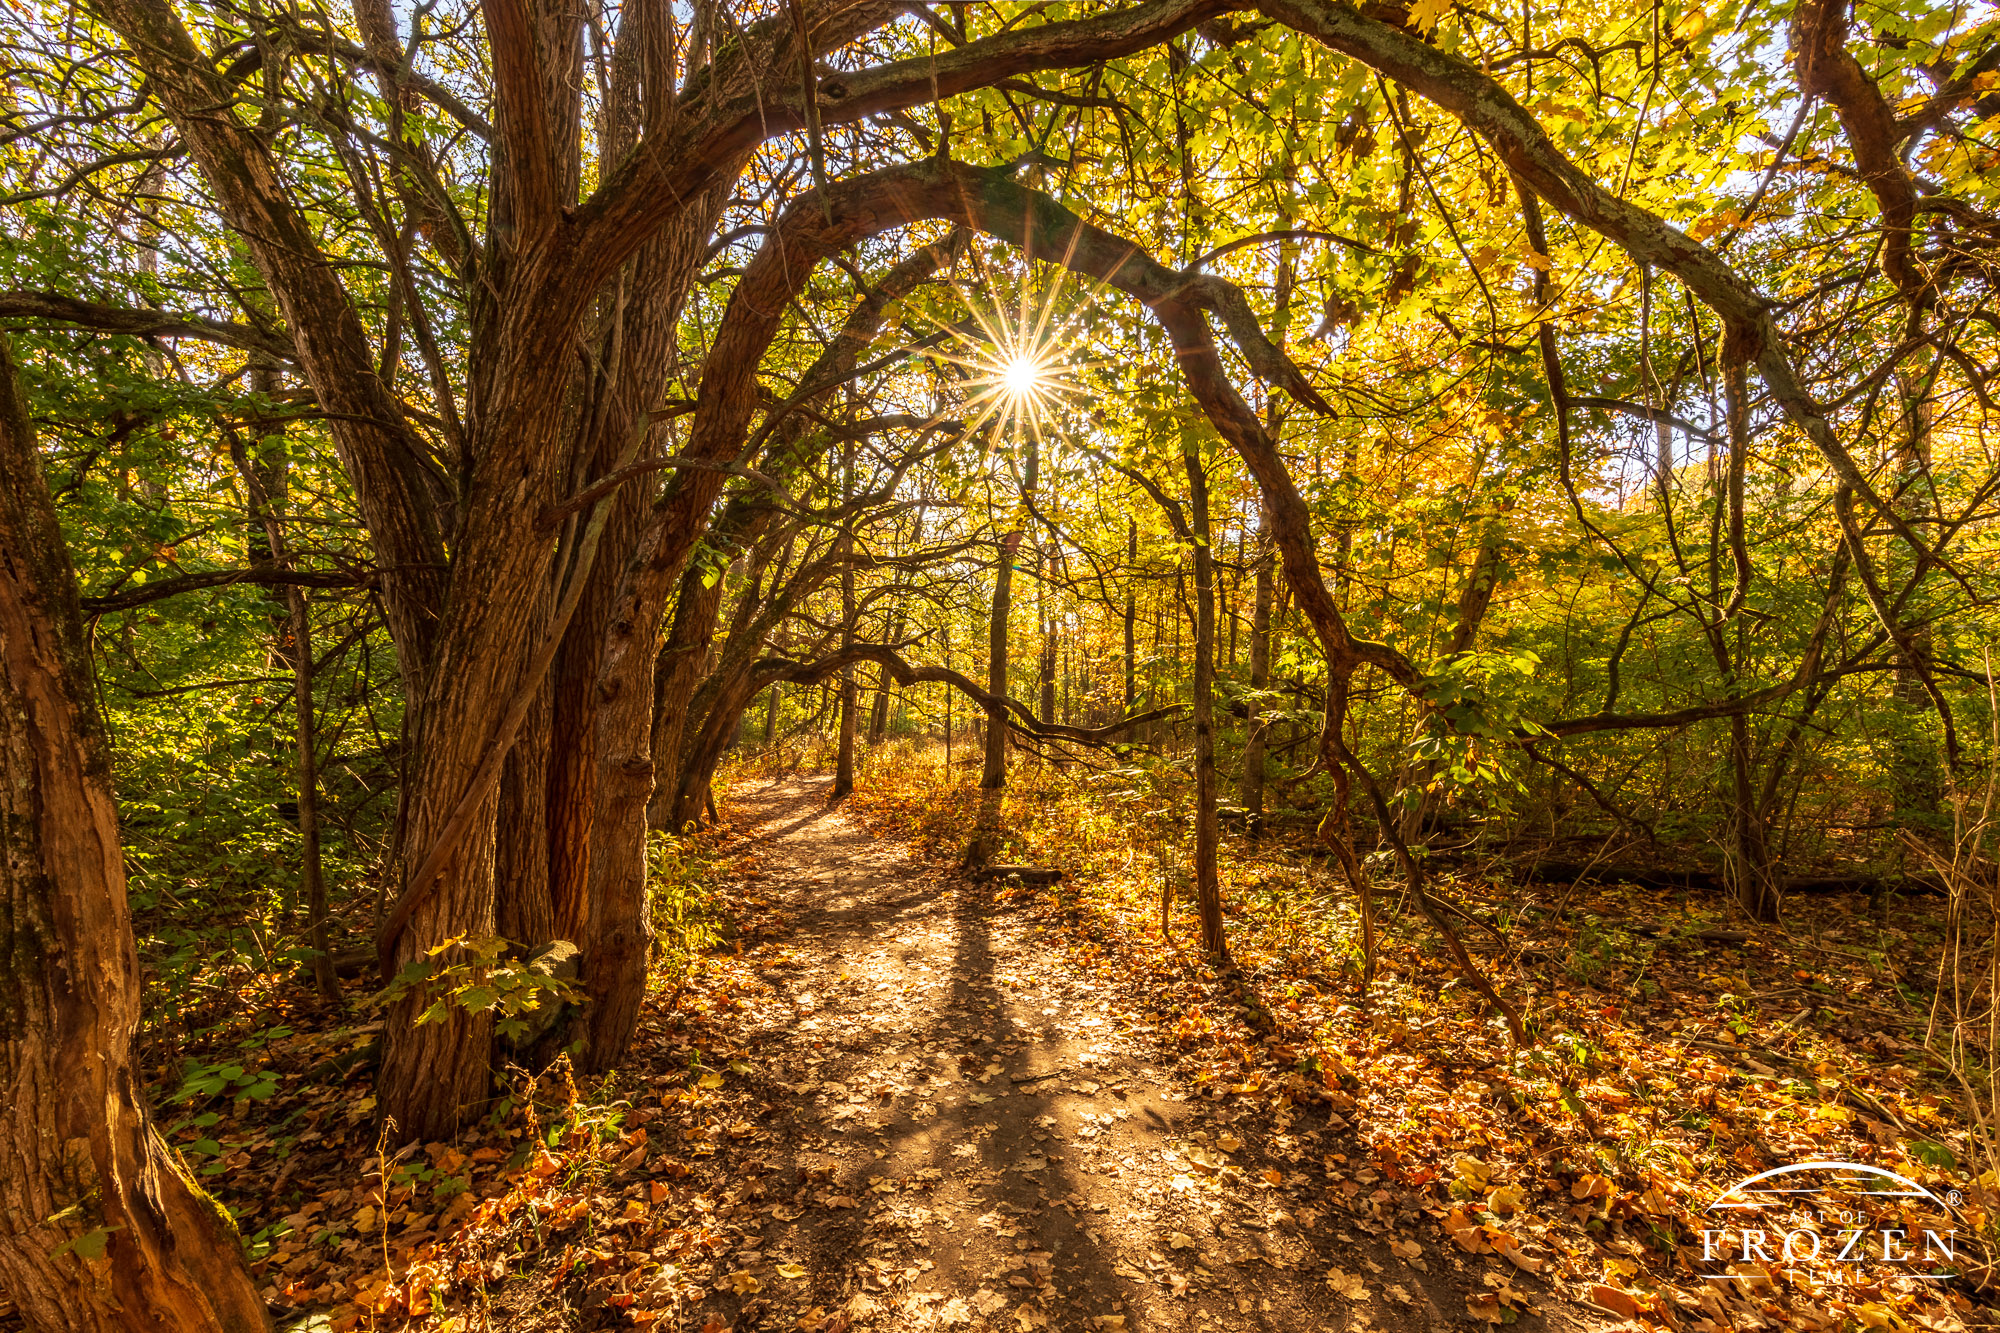 The arched limbs from this ancient row of Osage Orange trees form a delightful tunnel as the rising sunrise at the end of the path warmly backlights the yellowing autumn leaves.